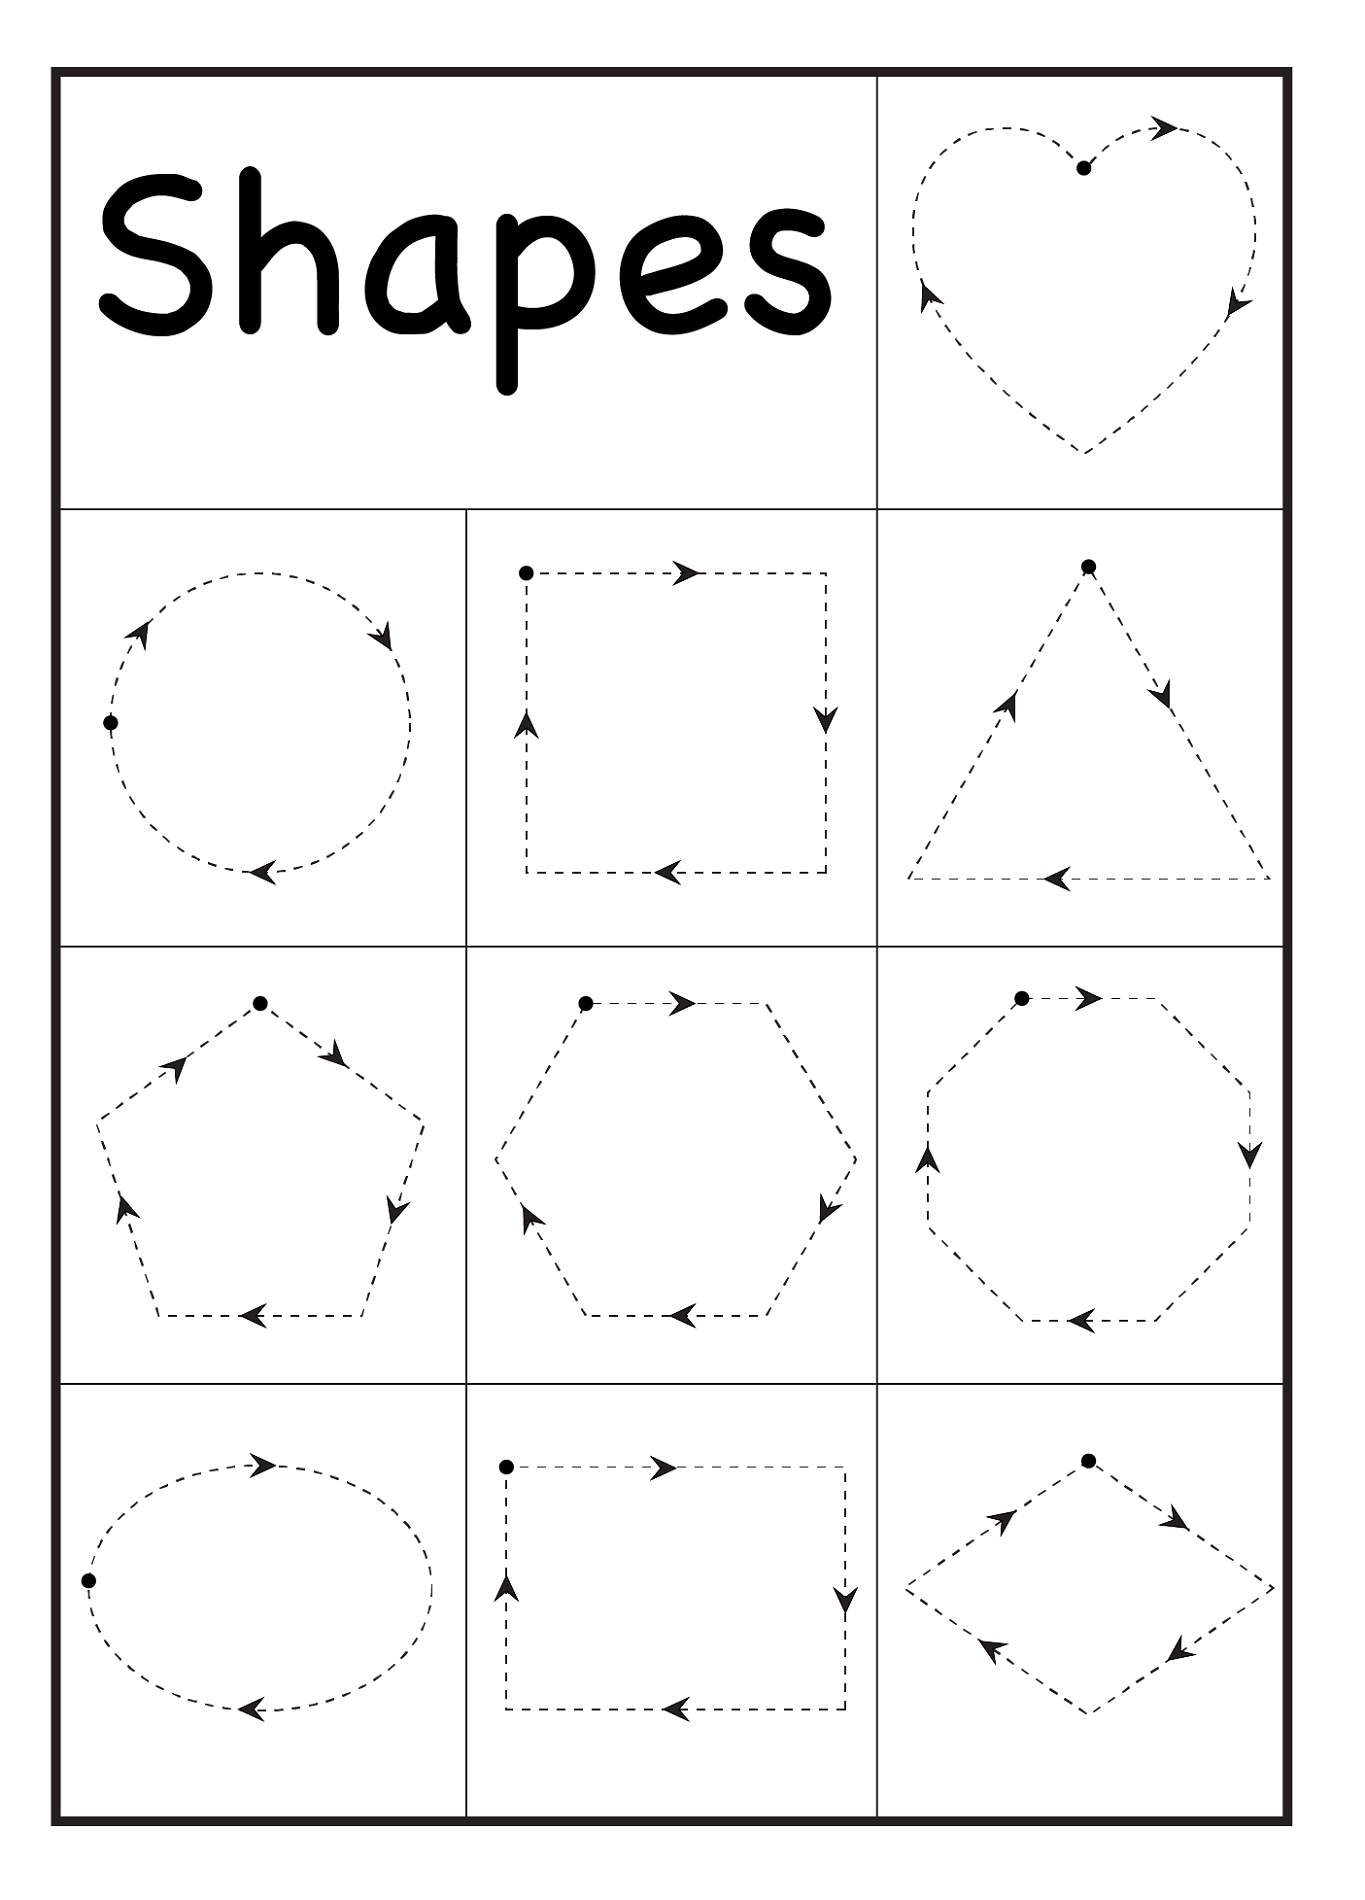 Worksheets for 2 Years Old Children | Activity Shelter